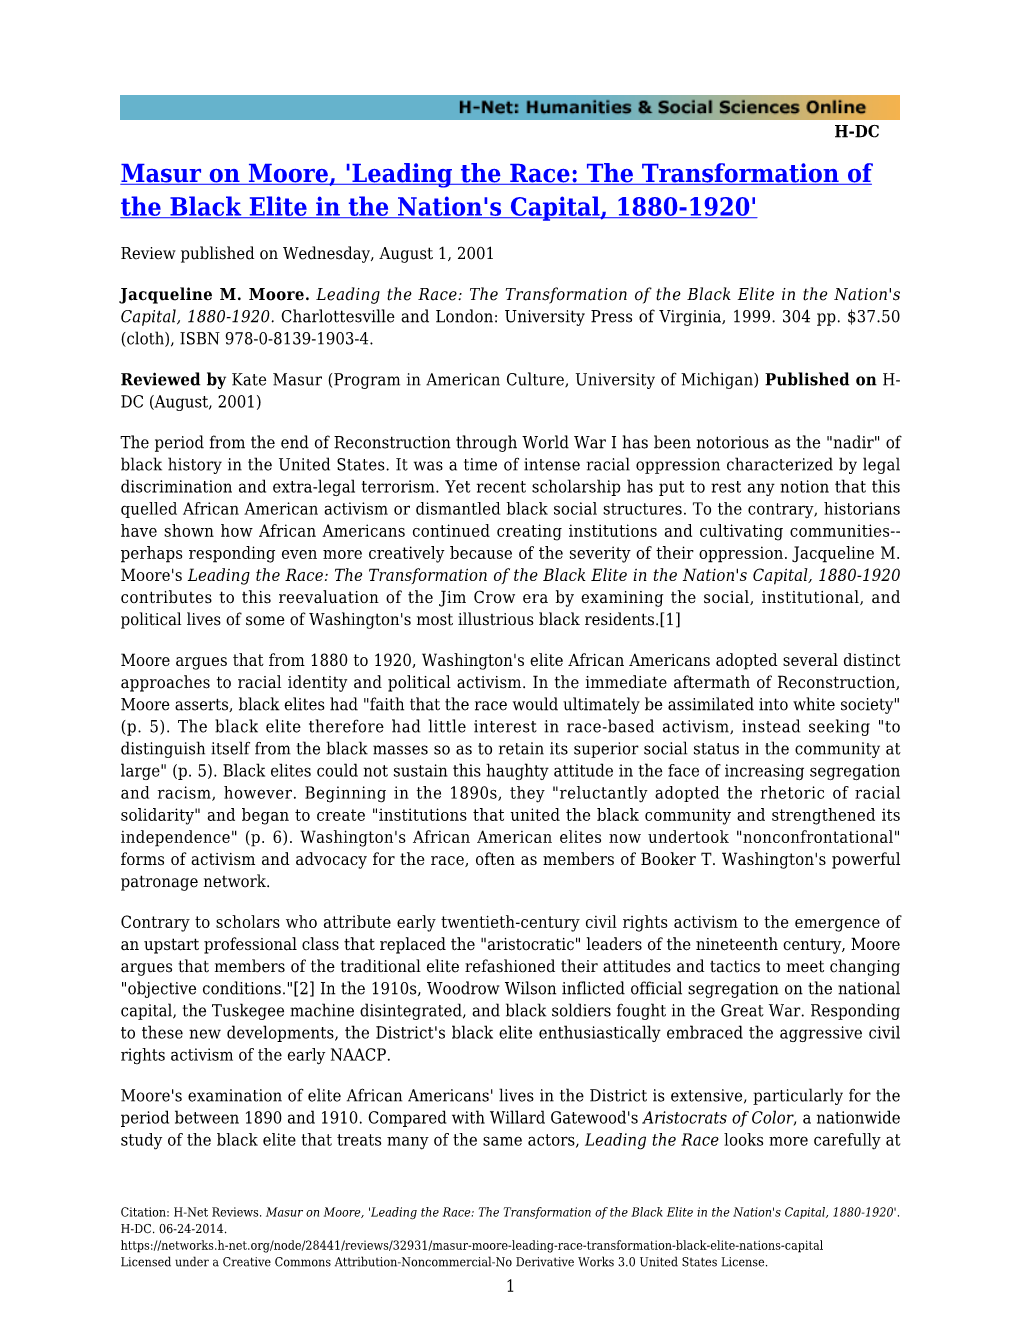 Masur on Moore, 'Leading the Race: the Transformation of the Black Elite in the Nation's Capital, 1880-1920'